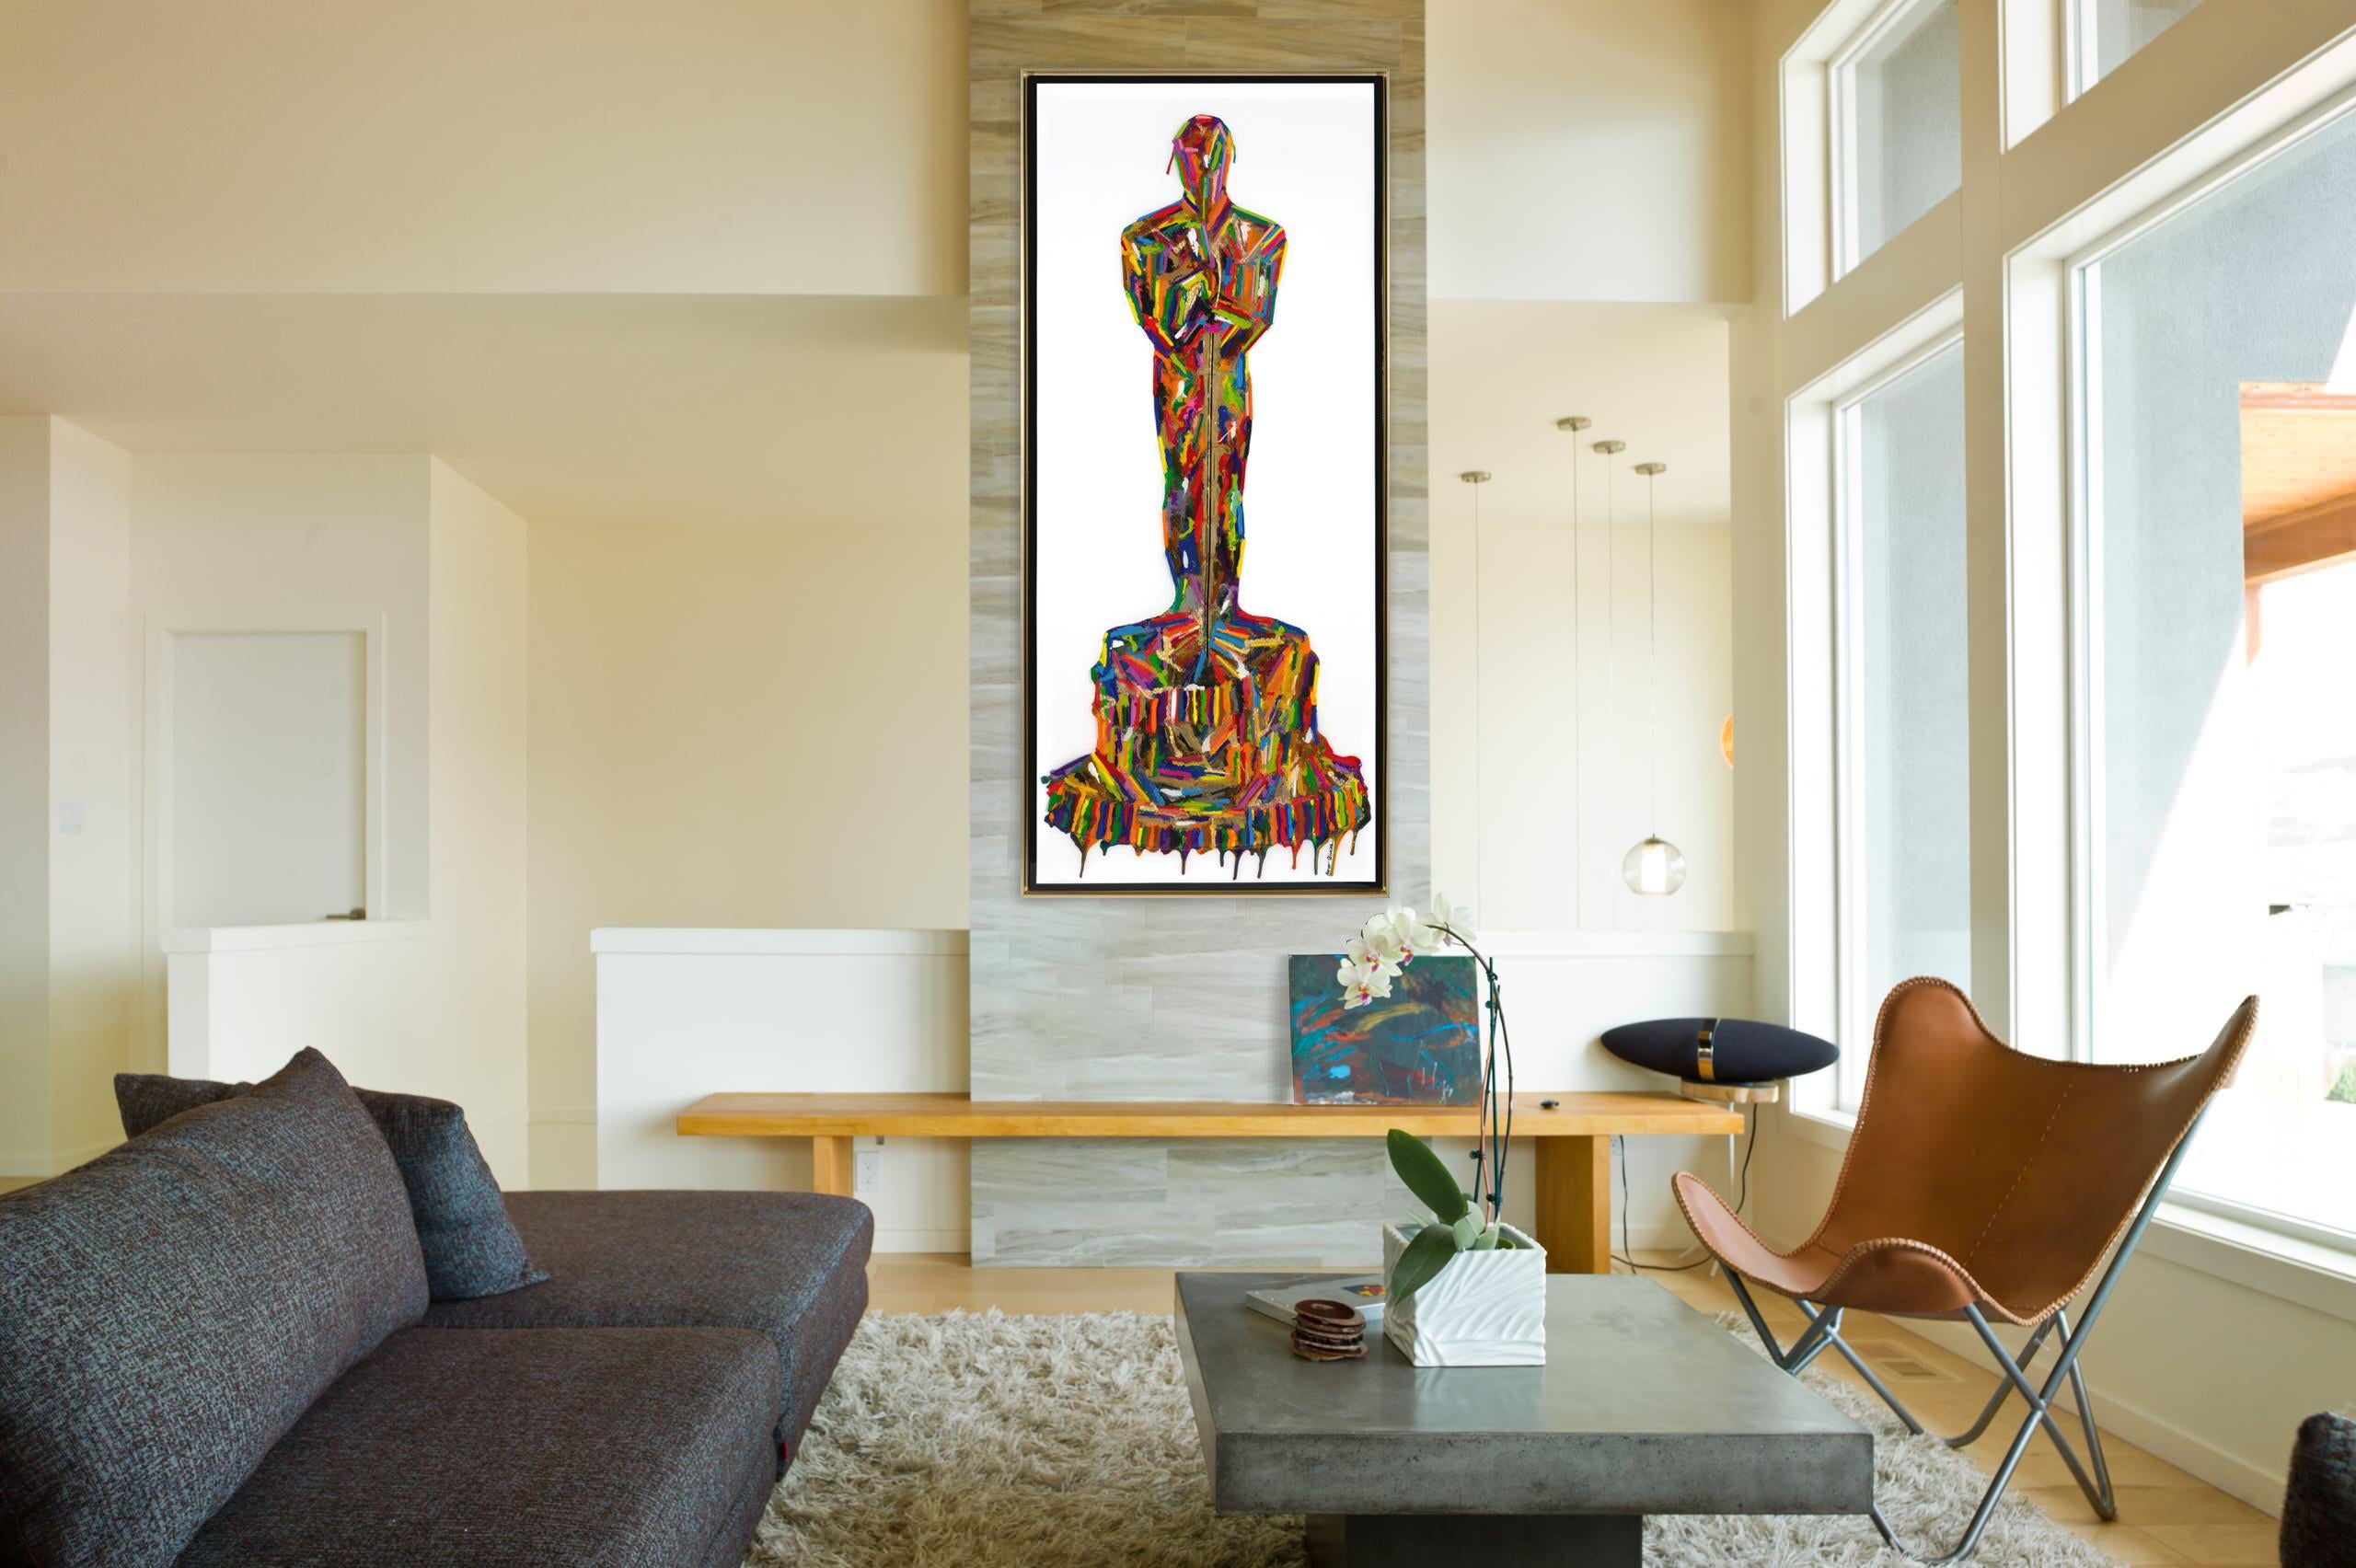 Melted Oscar II (Original Framed Mixed Media Artwork) - Beige Abstract Painting by Mauro Oliveira